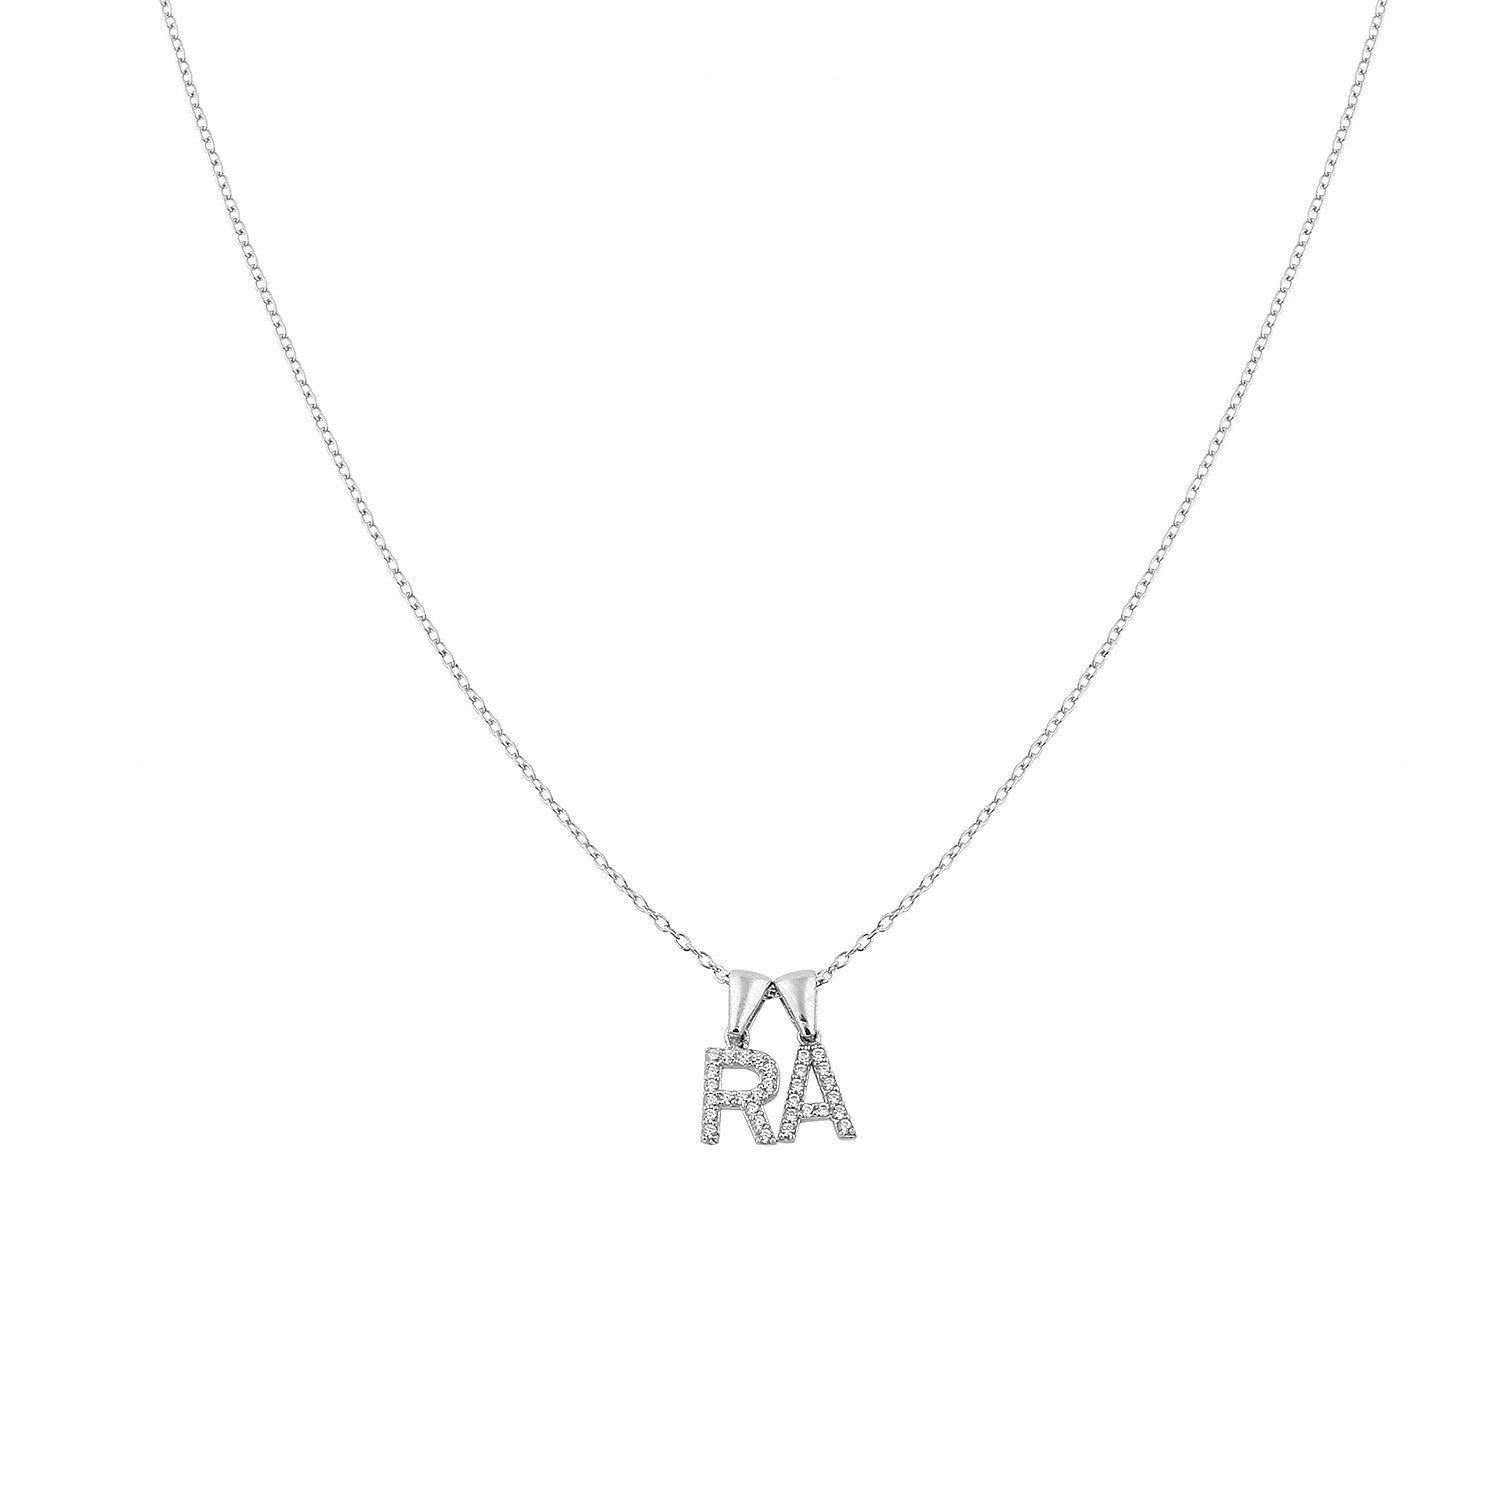 Custom Layered Initial Necklace JEWELRY The Sis Kiss Two Initials Silver with Crystals